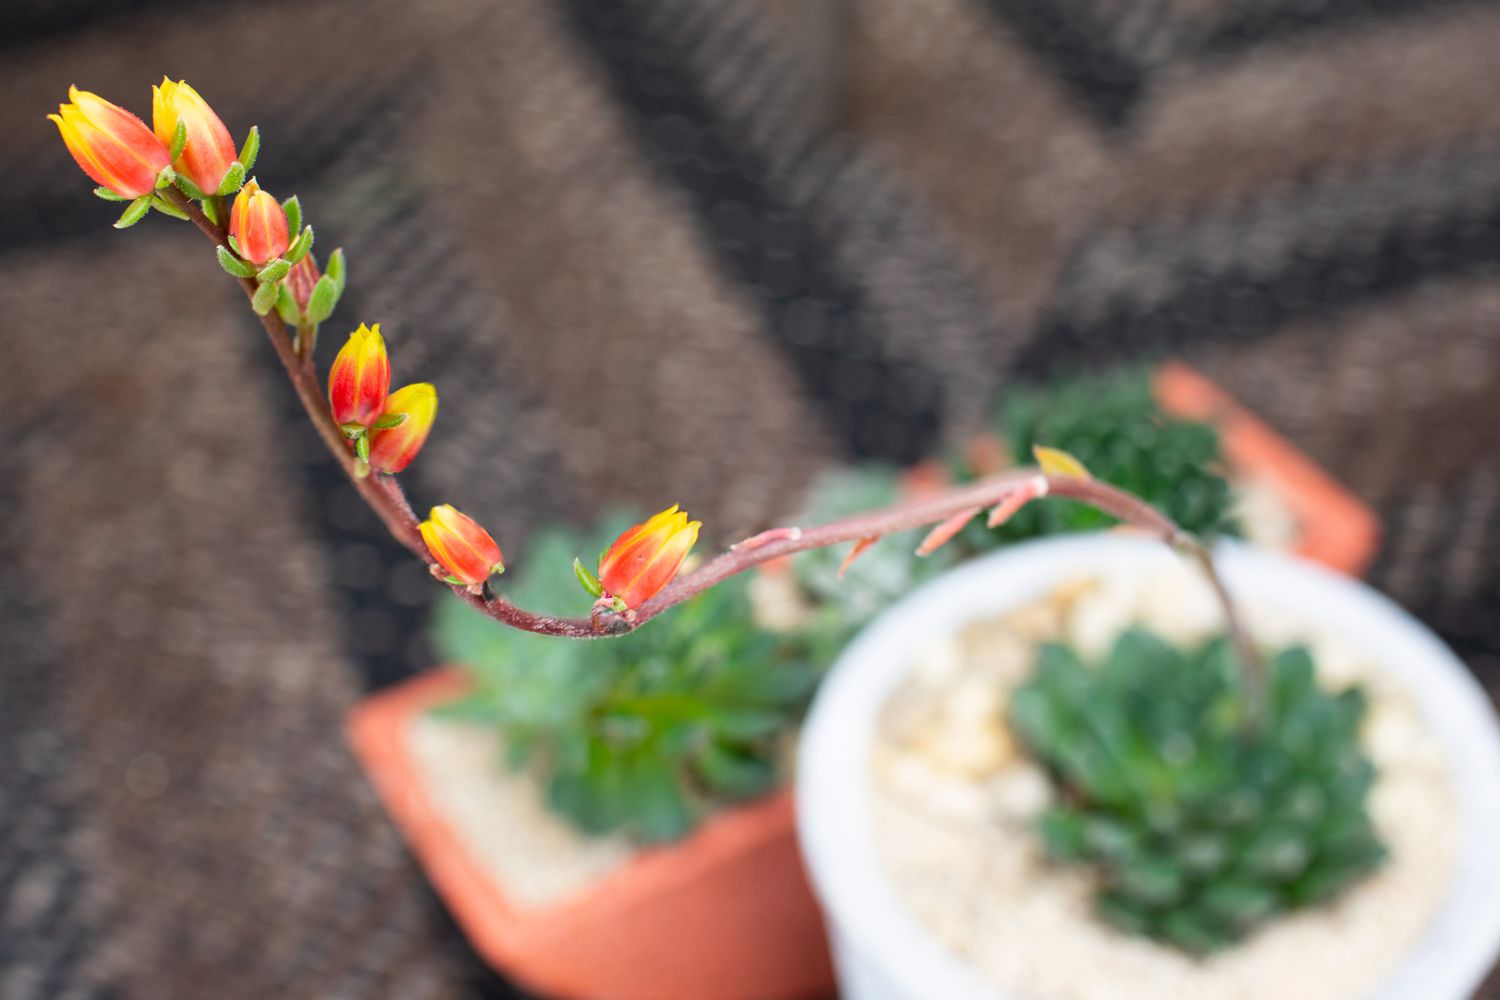 Mexican firecracker succulent with tall stem with orange and yellow flower buds